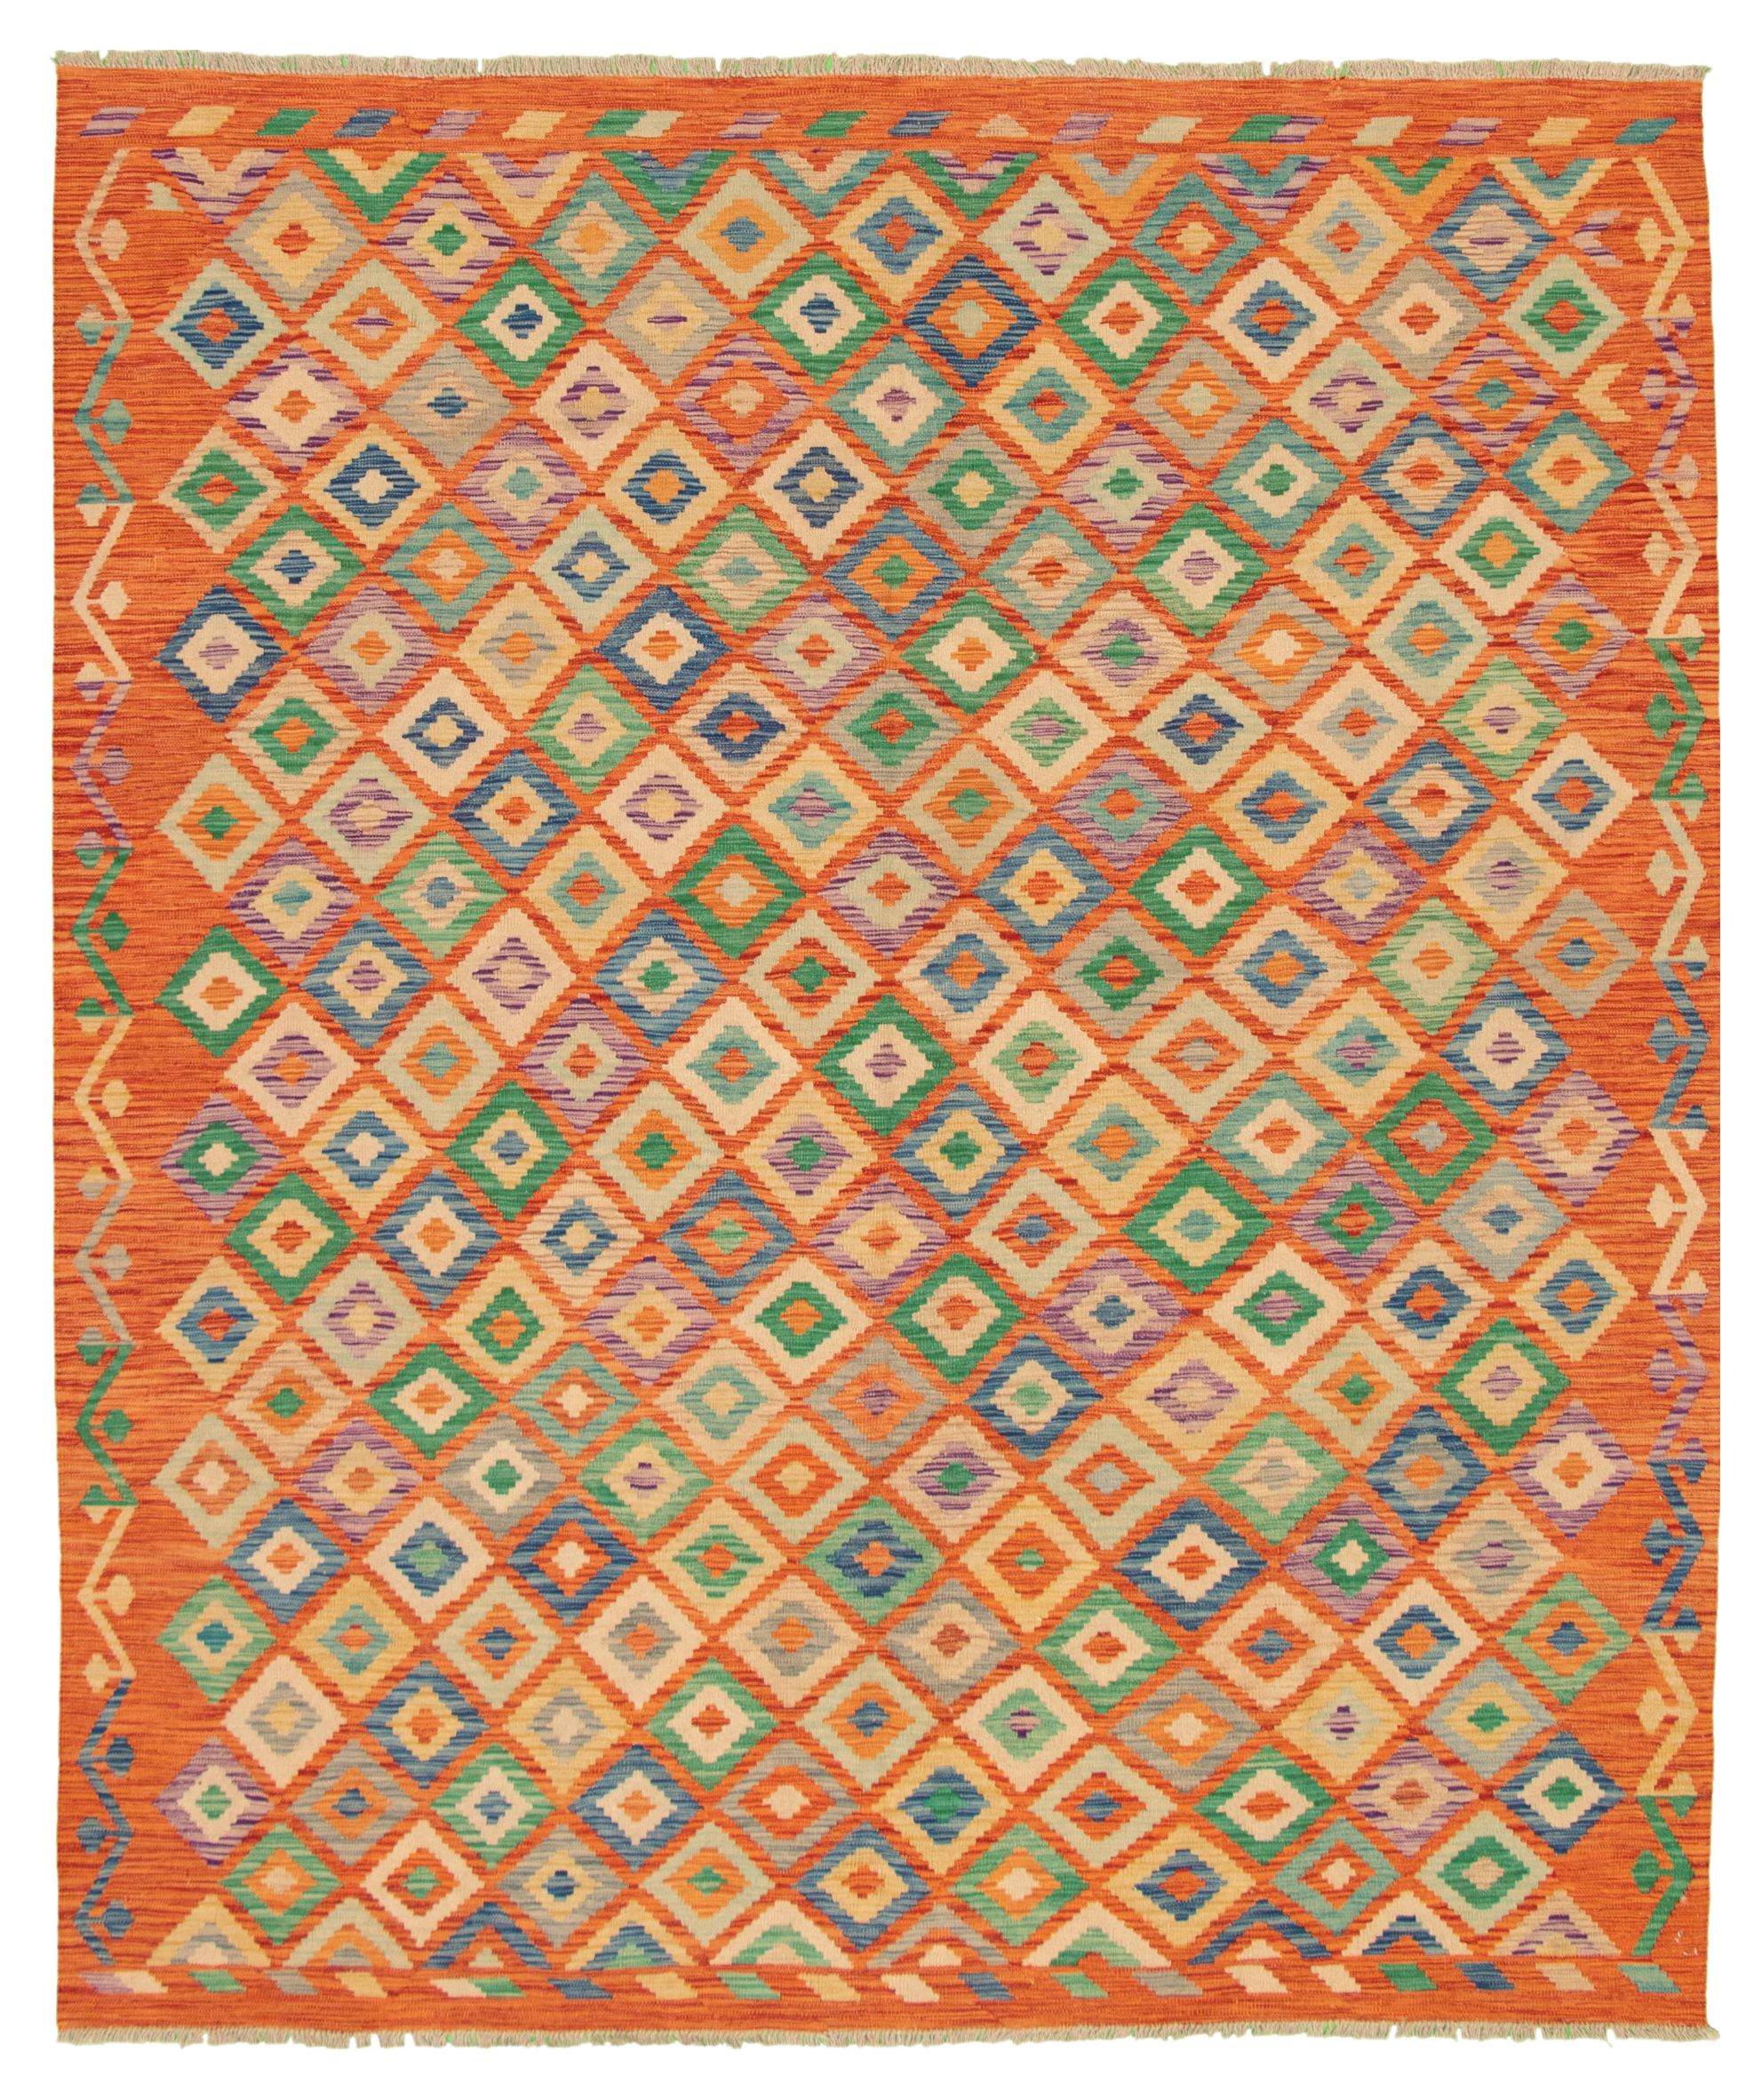 Hand woven Bold and Colorful  Copper Wool Kilim 8'5" x 9'10" Size: 8'5" x 9'10"  